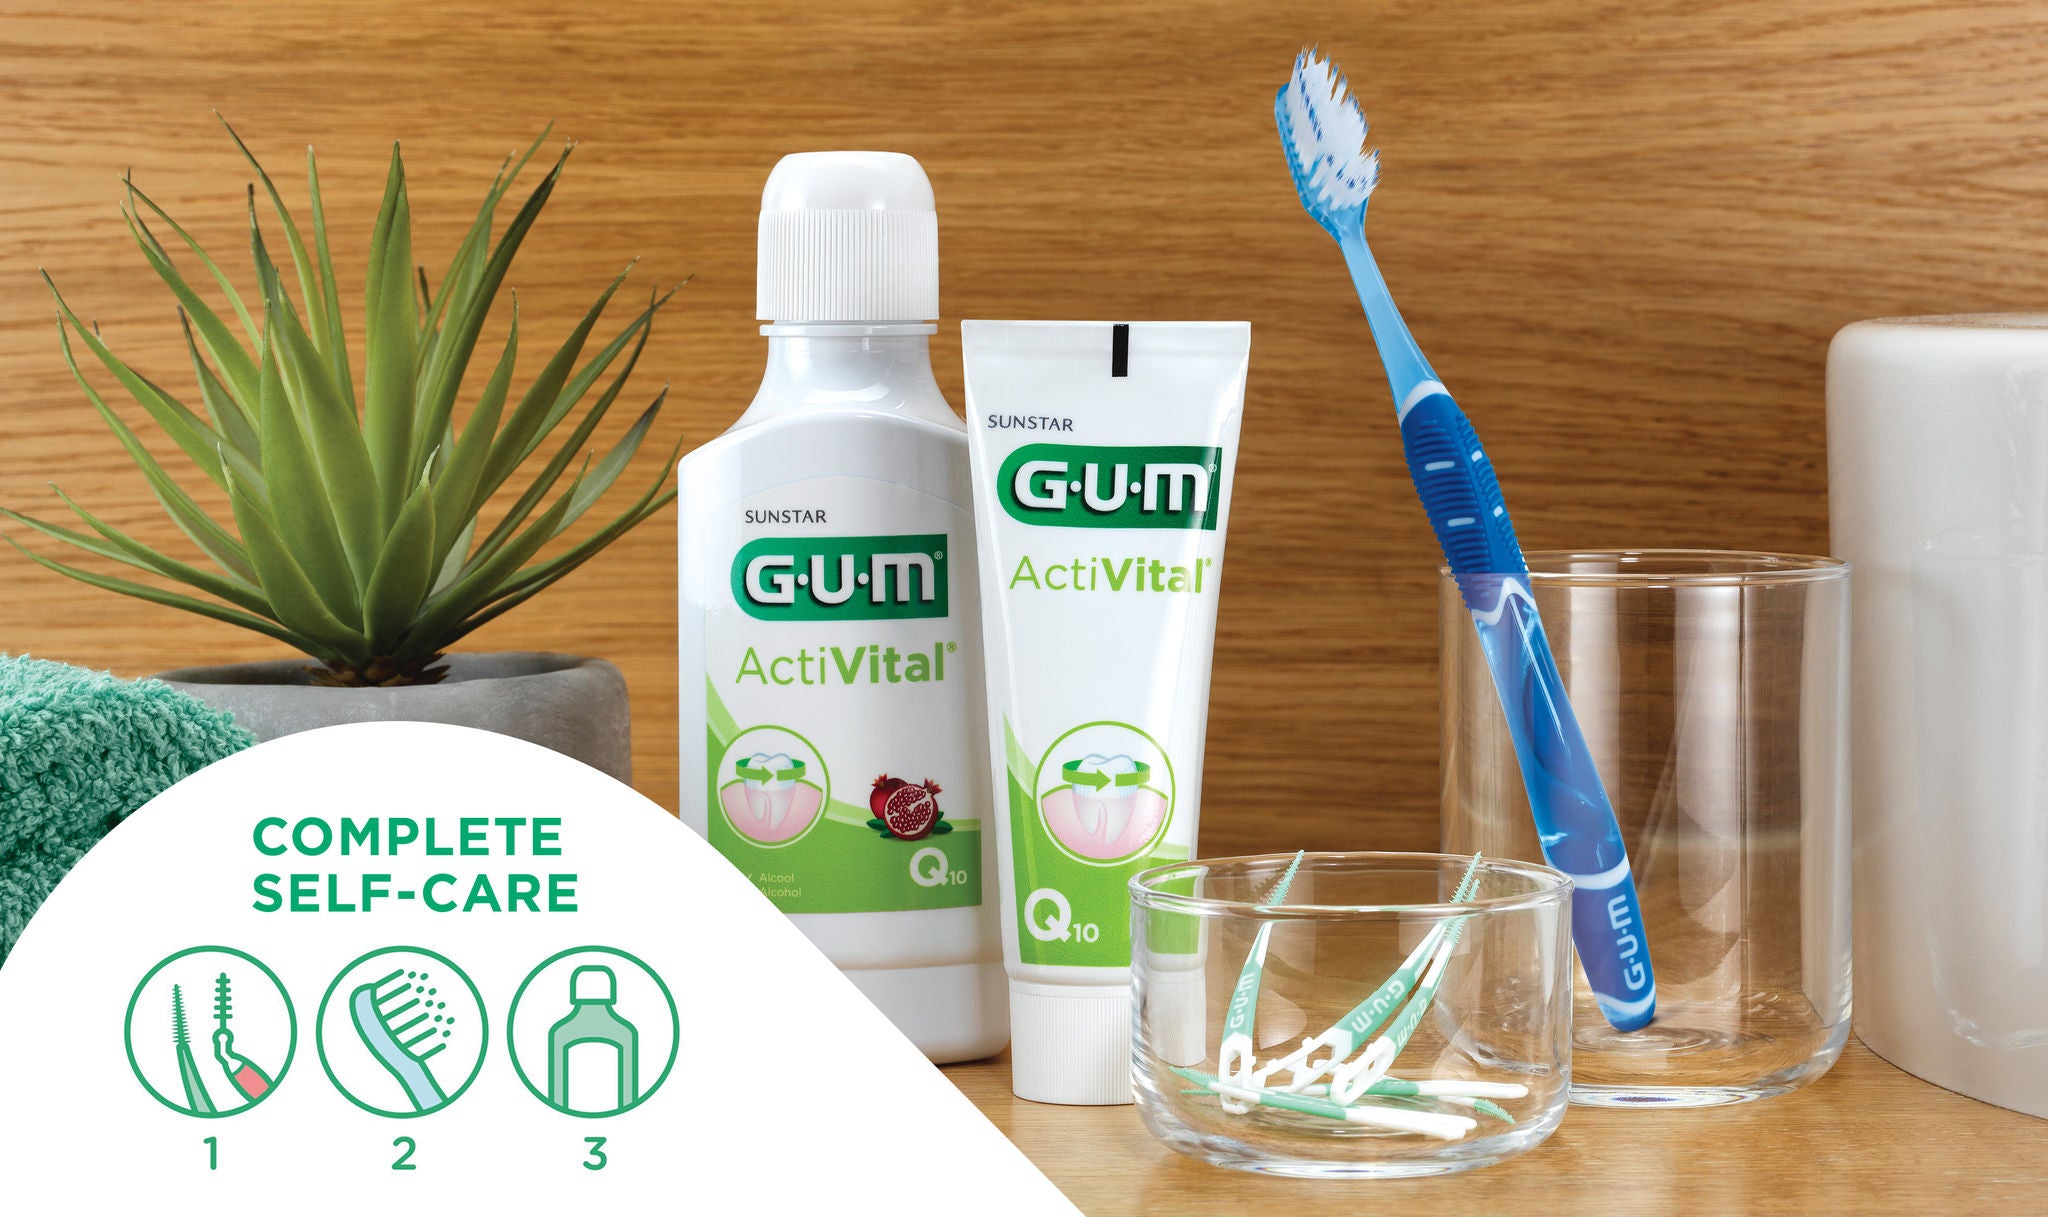 A complete self care with the new GUM PRO toothbrush and the ActiVital range